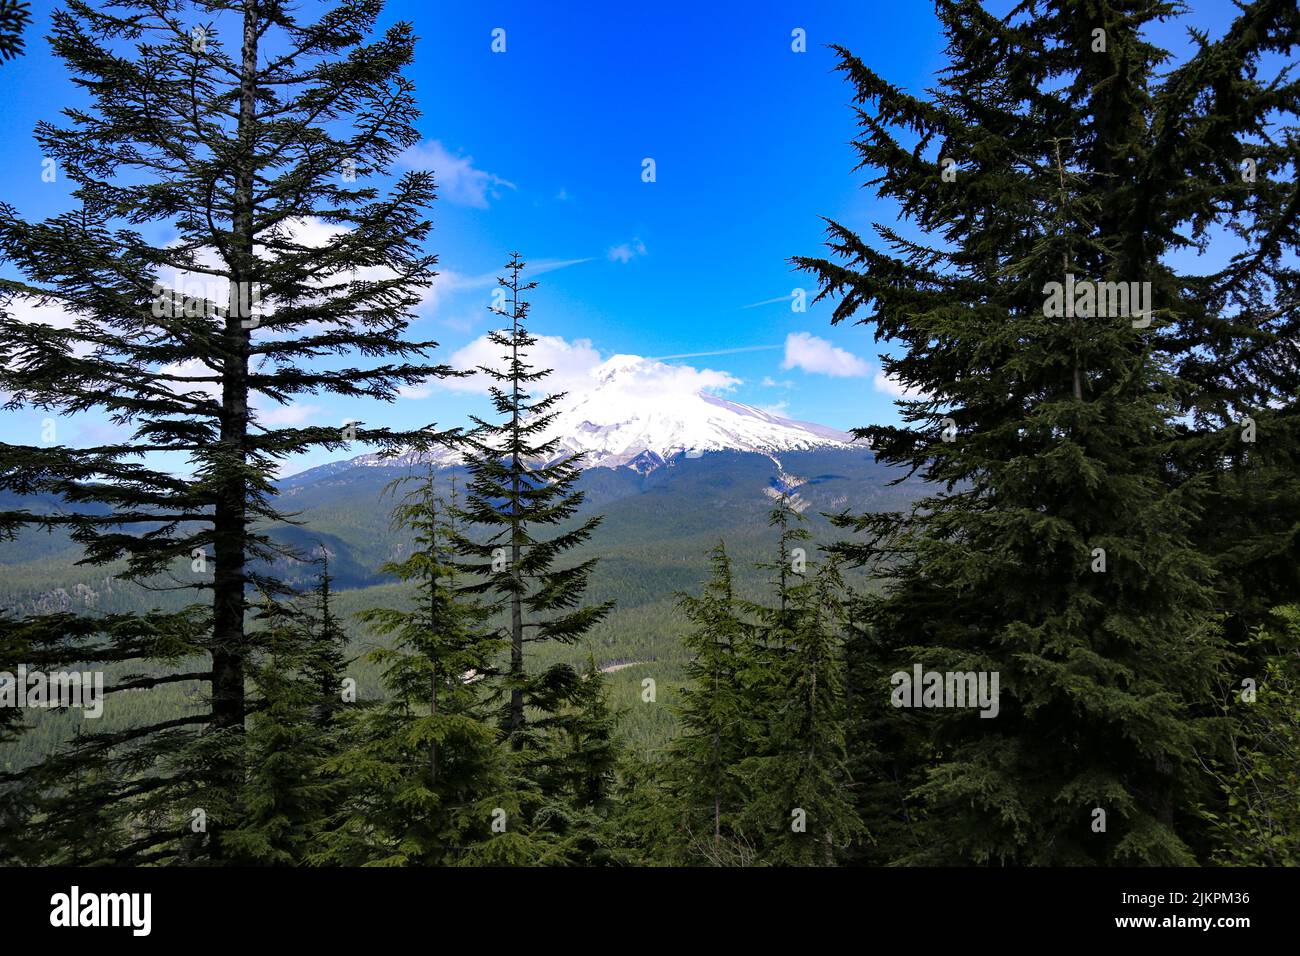 A landscape view of beautiful mountains and trees under a blue sky on a sunny day Stock Photo